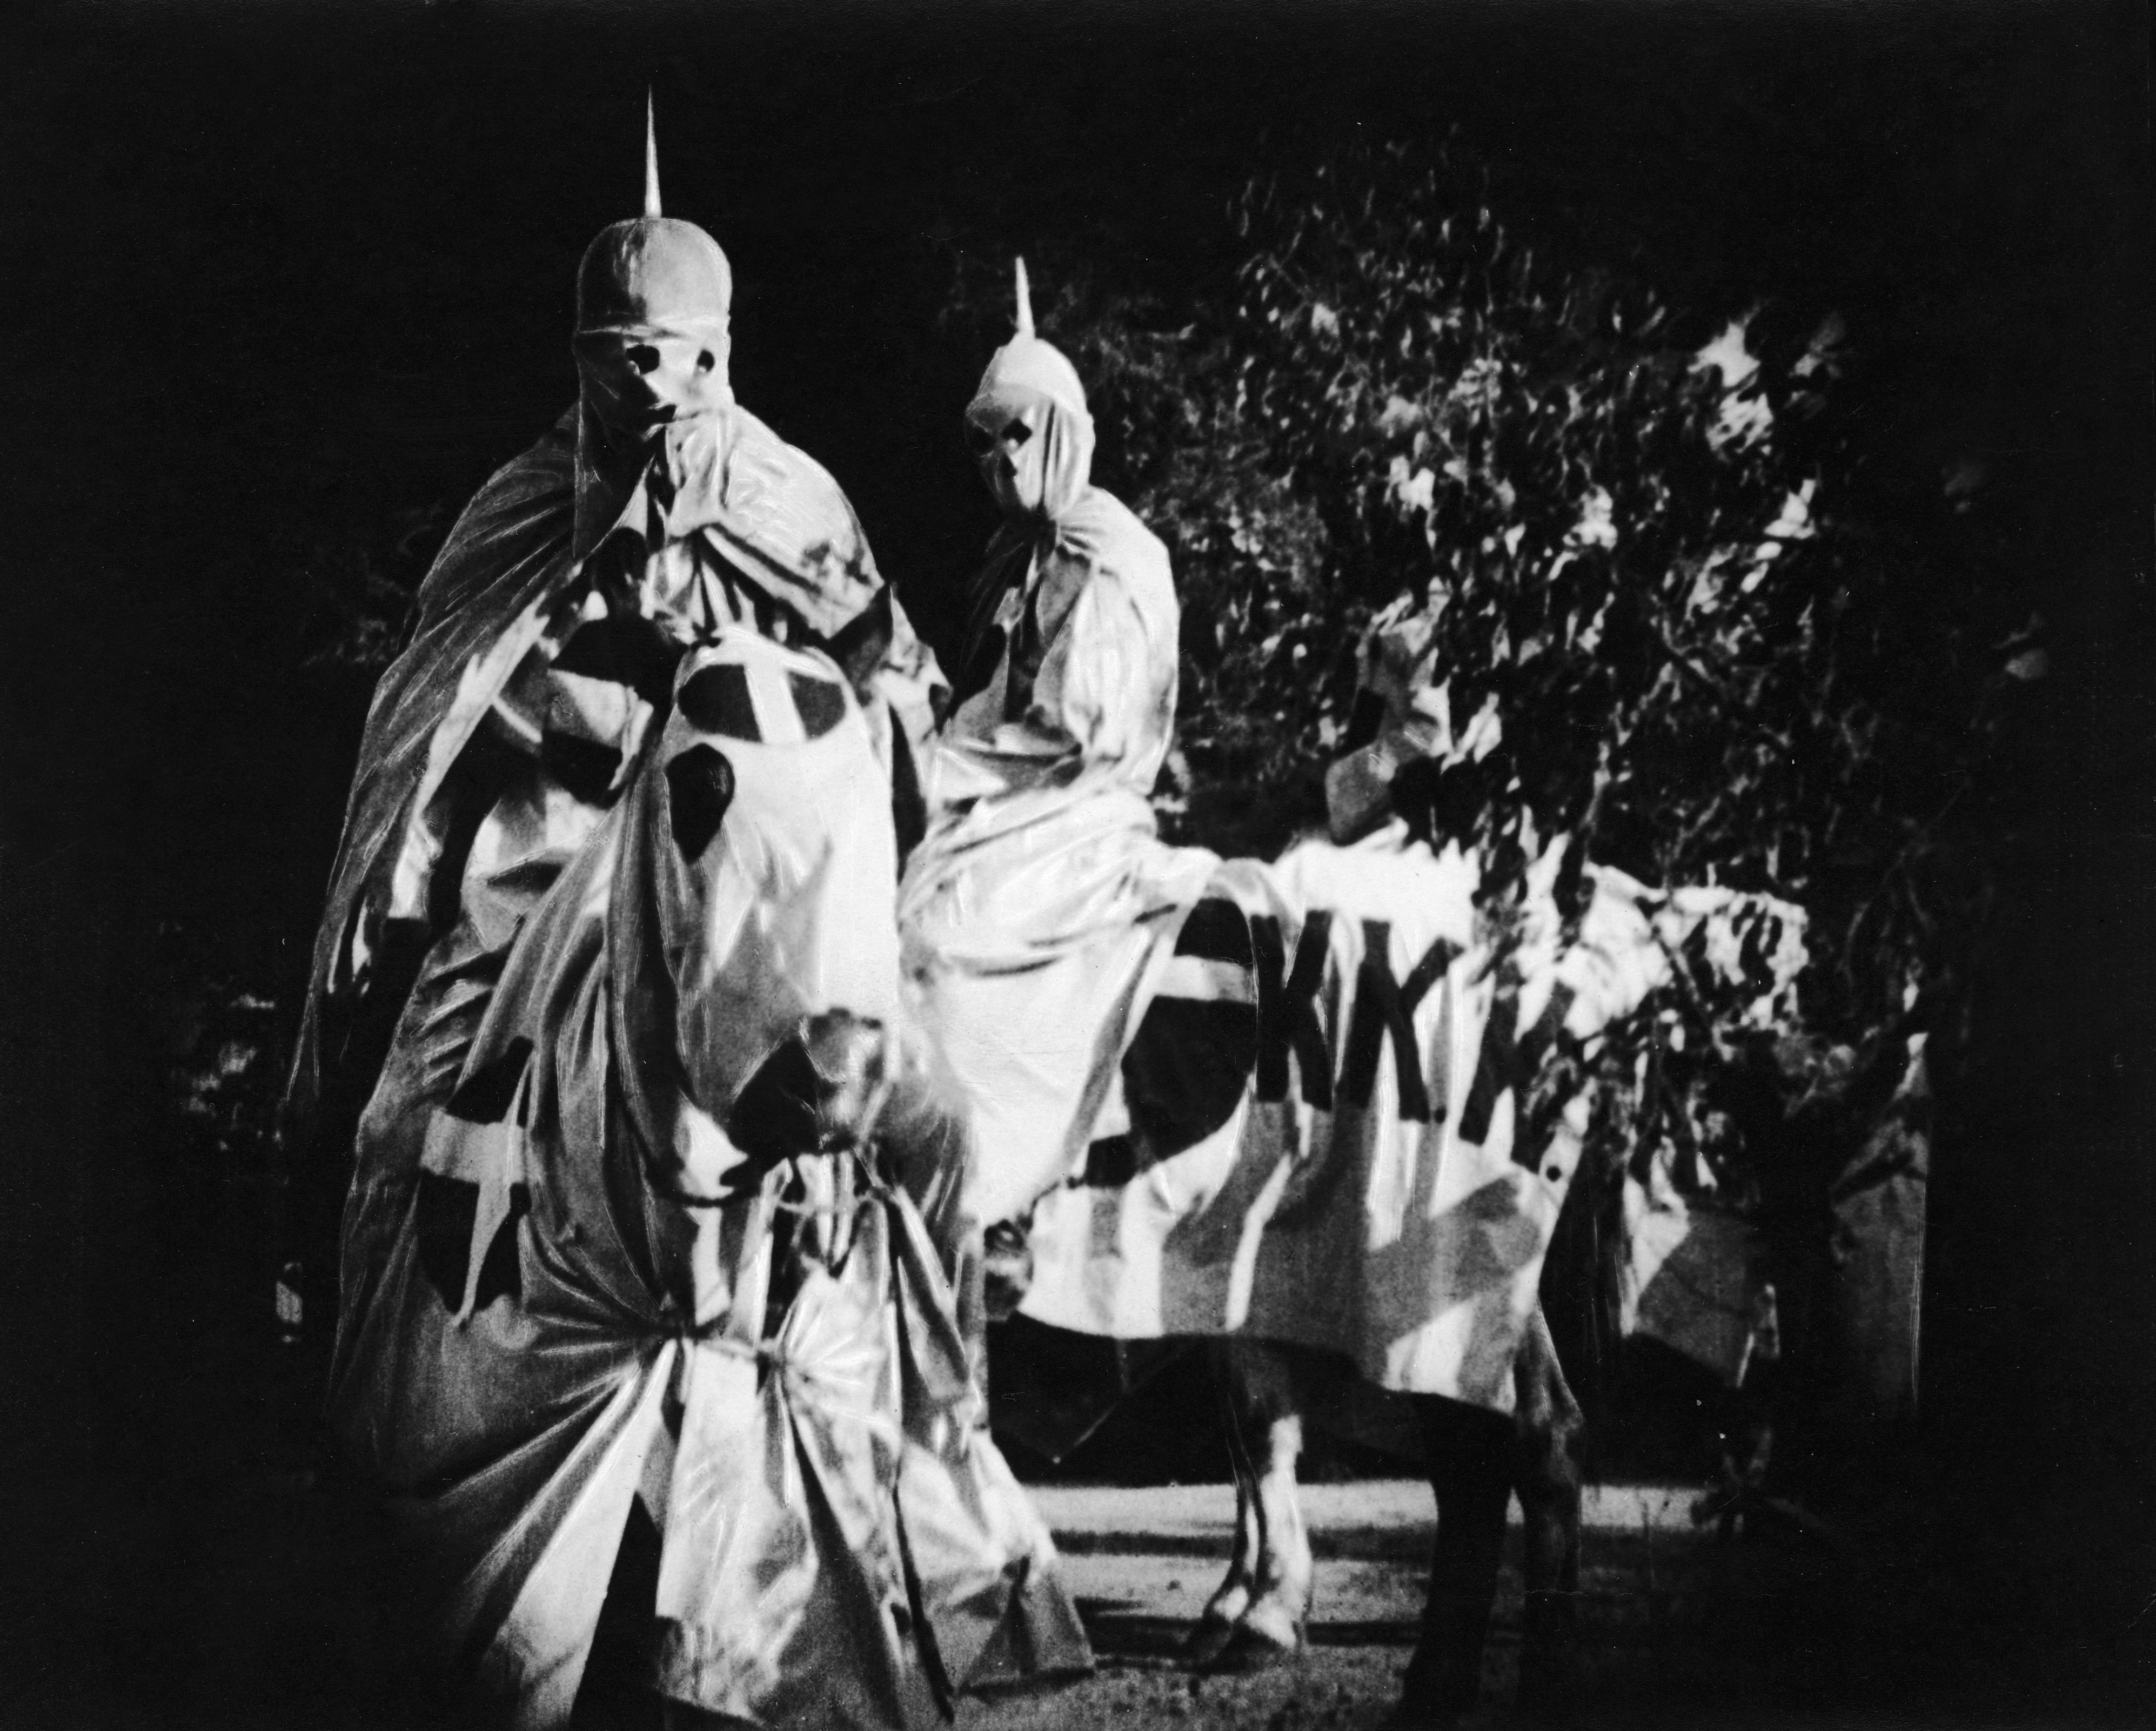 Actors costumed in the full regalia of the Ku Klux Klan ride on horses at night in a still from the 'The Birth of a Nation,' directed by D. W. Griffith, California, 1914. (Hulton Archive/Getty Images)